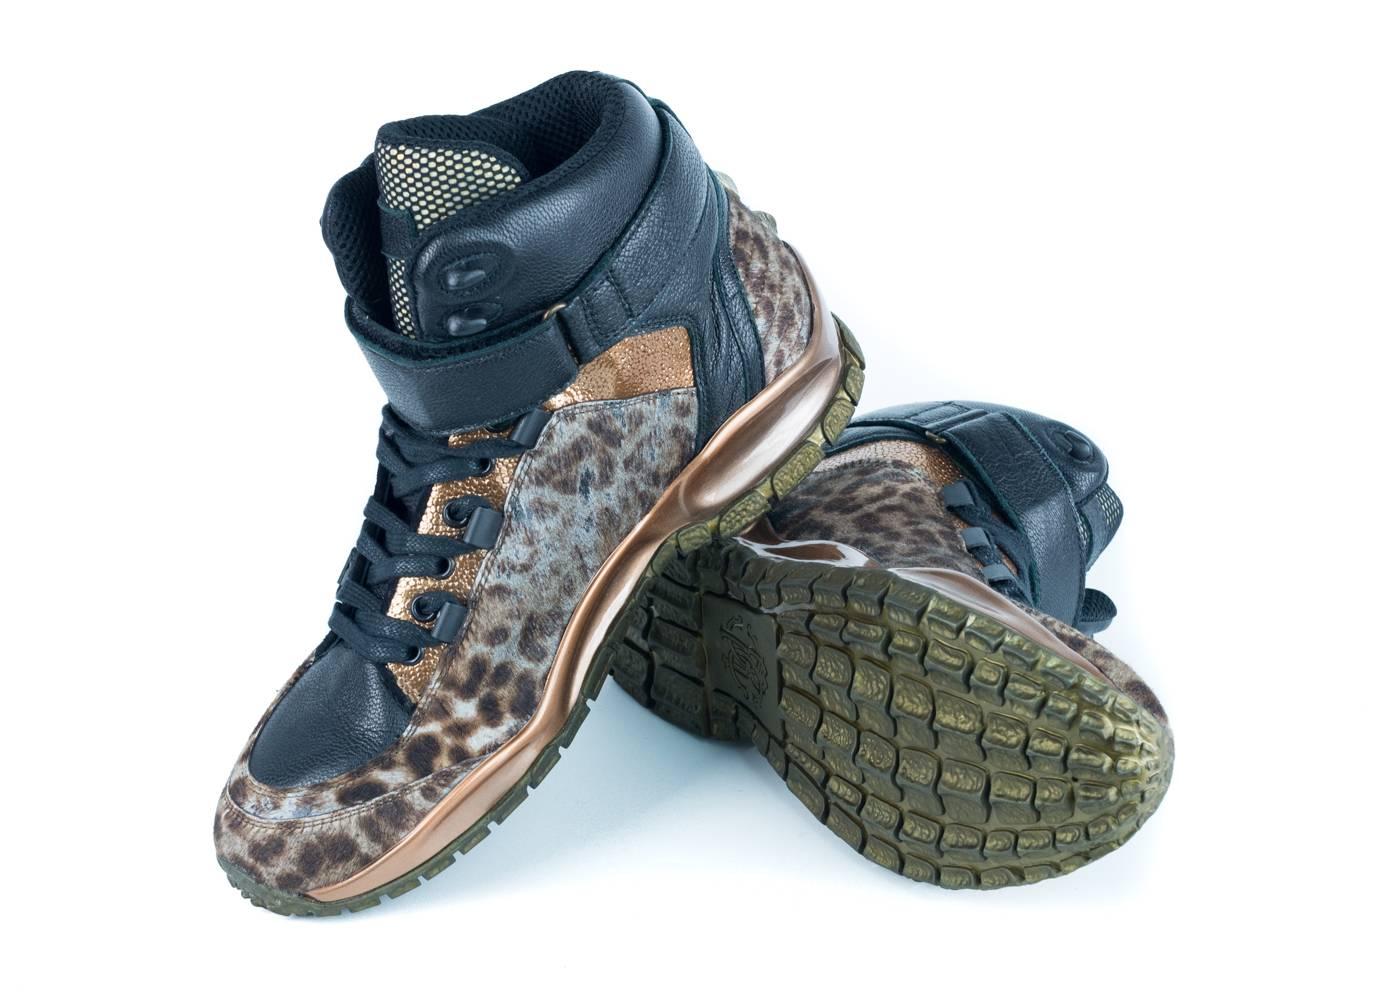 Roberto Cavalli Womens Leopard-Print High-Top Sneakers In New Condition For Sale In Brooklyn, NY